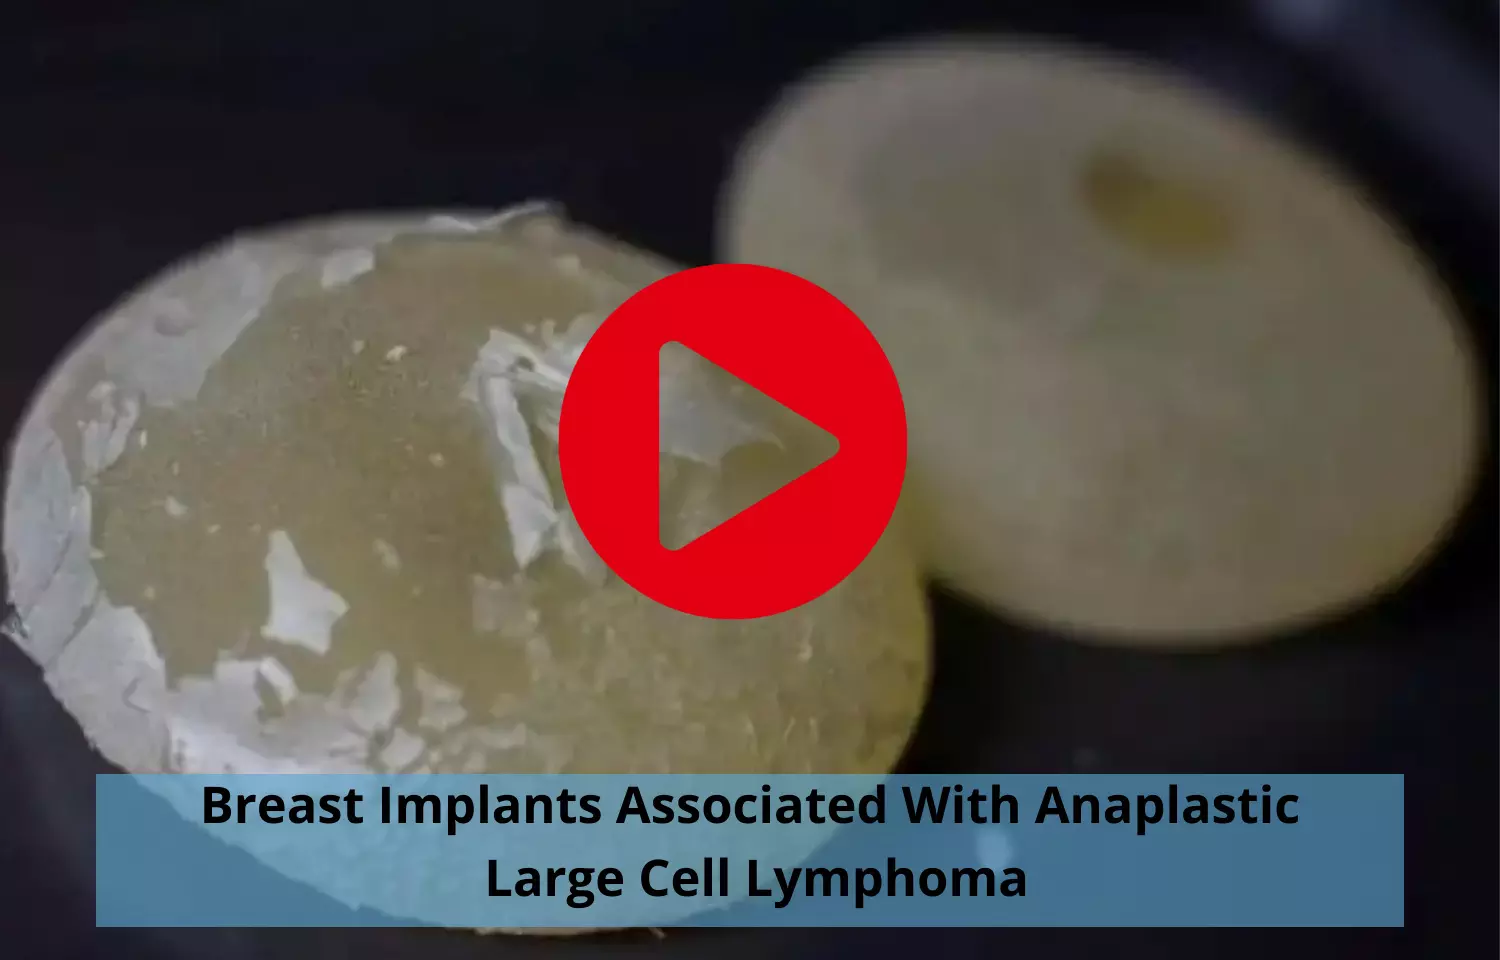 Breast Implants to cause Anaplastic Large Cell Lymphoma